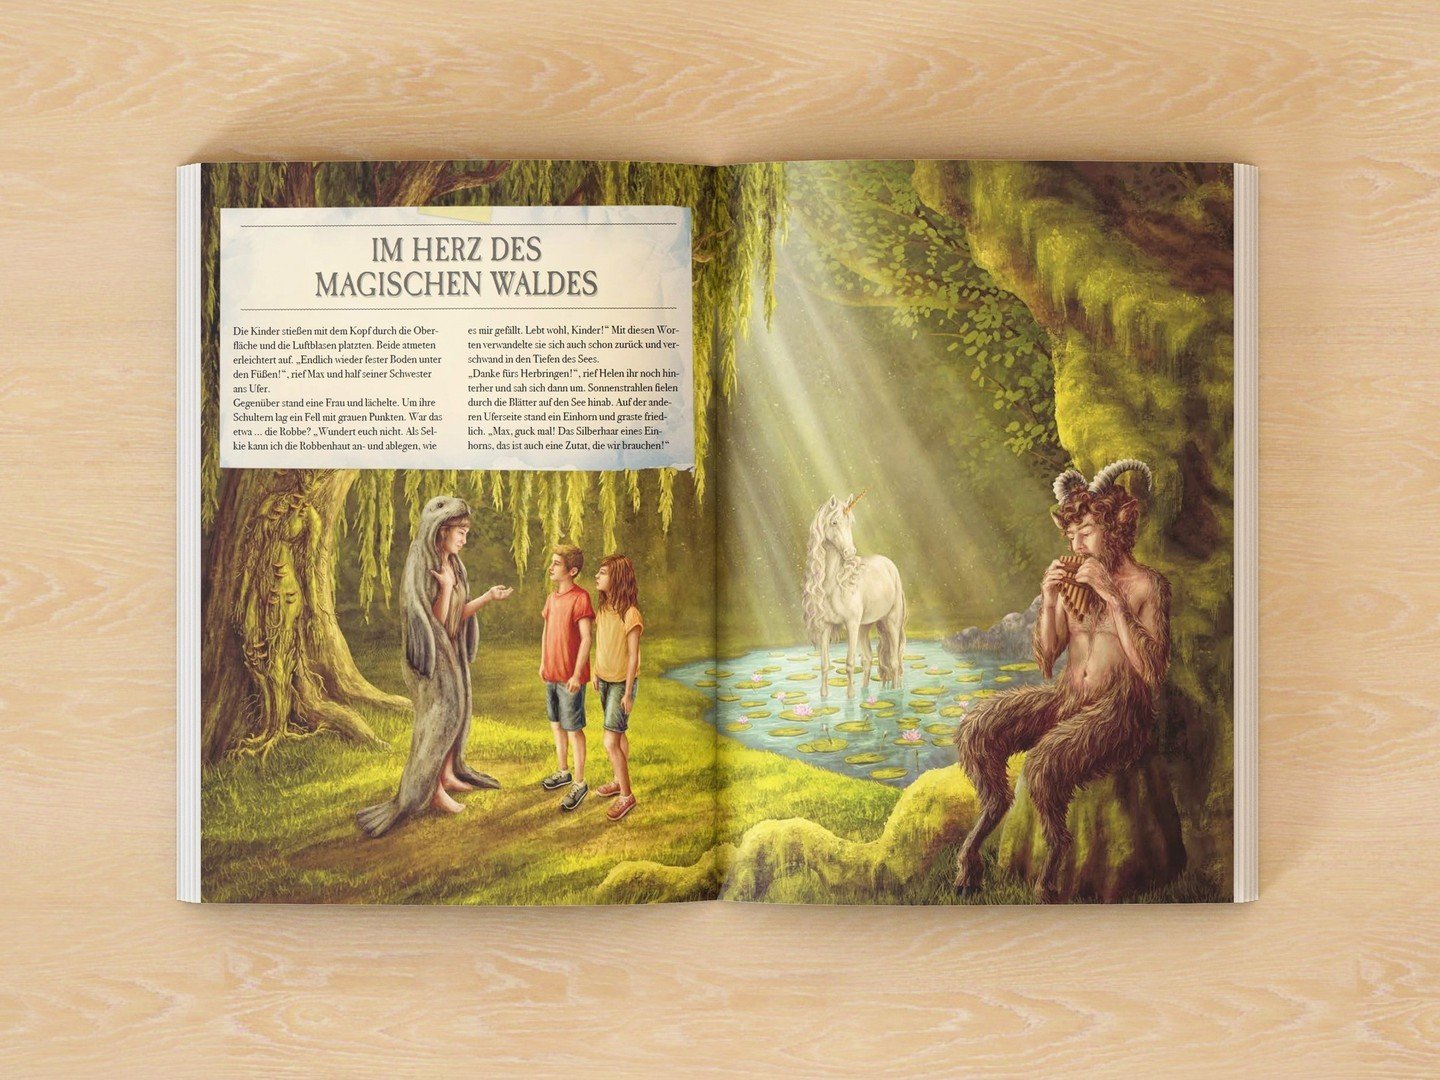 ✨️ One of the most beautiful pages of the book, I loved drawing this magical scene with the unicorn in the lake, the faun playing, and the Dryad camouflaged in the tree. The second double-page spread illustrates the seven-tailed fox called Kitsune. A